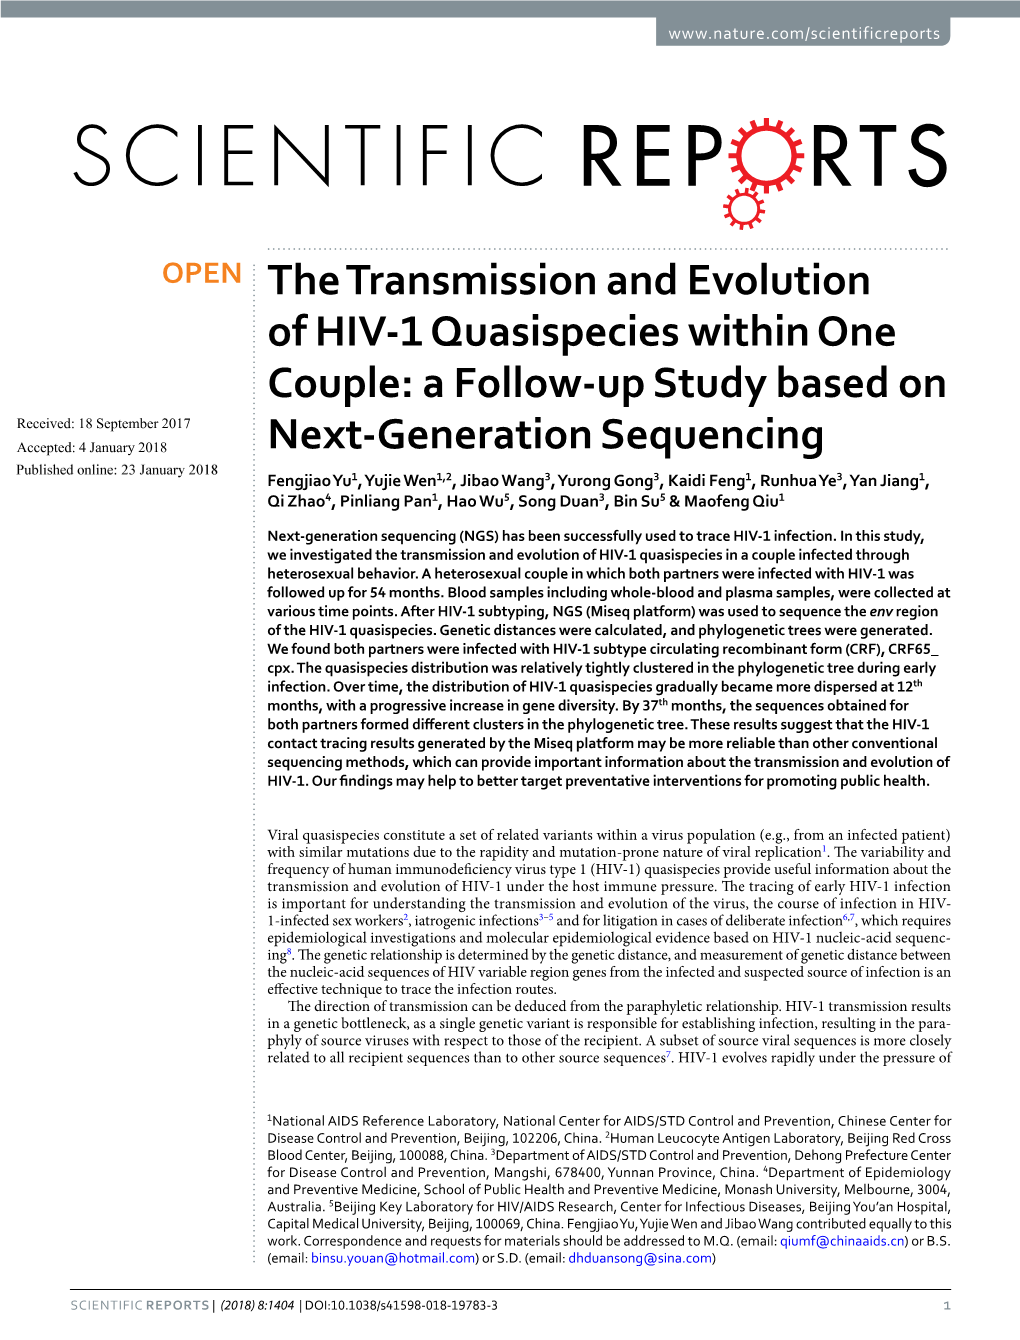 The Transmission and Evolution of HIV-1 Quasispecies Within One